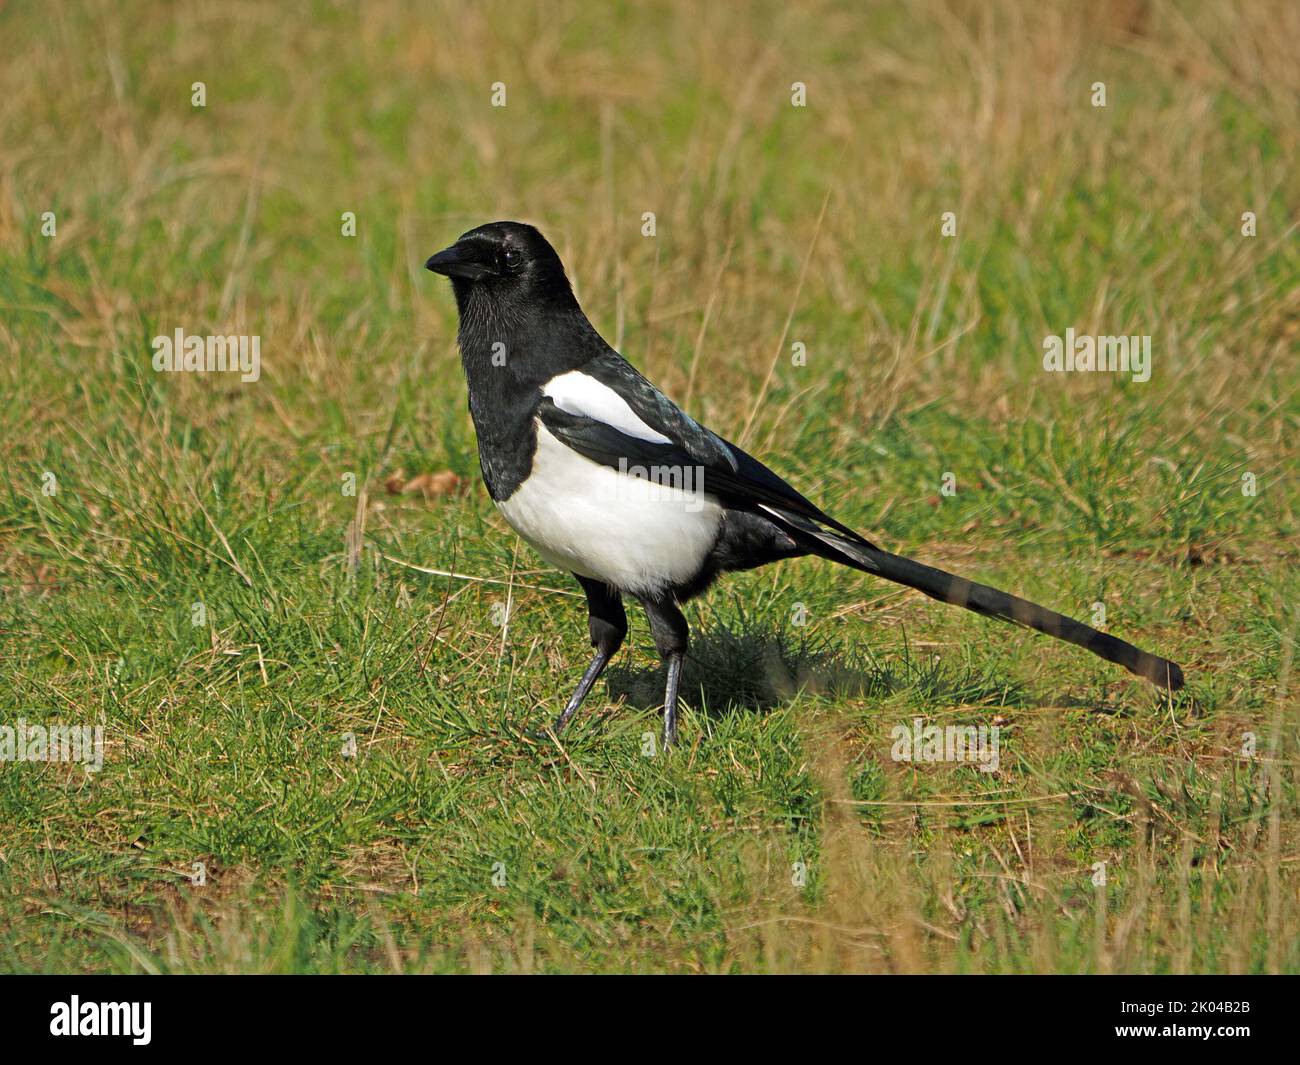 Eurasian magpie or common magpie (pica pica) with iridescent plumage foraging in grassland  London,England UK Stock Photo